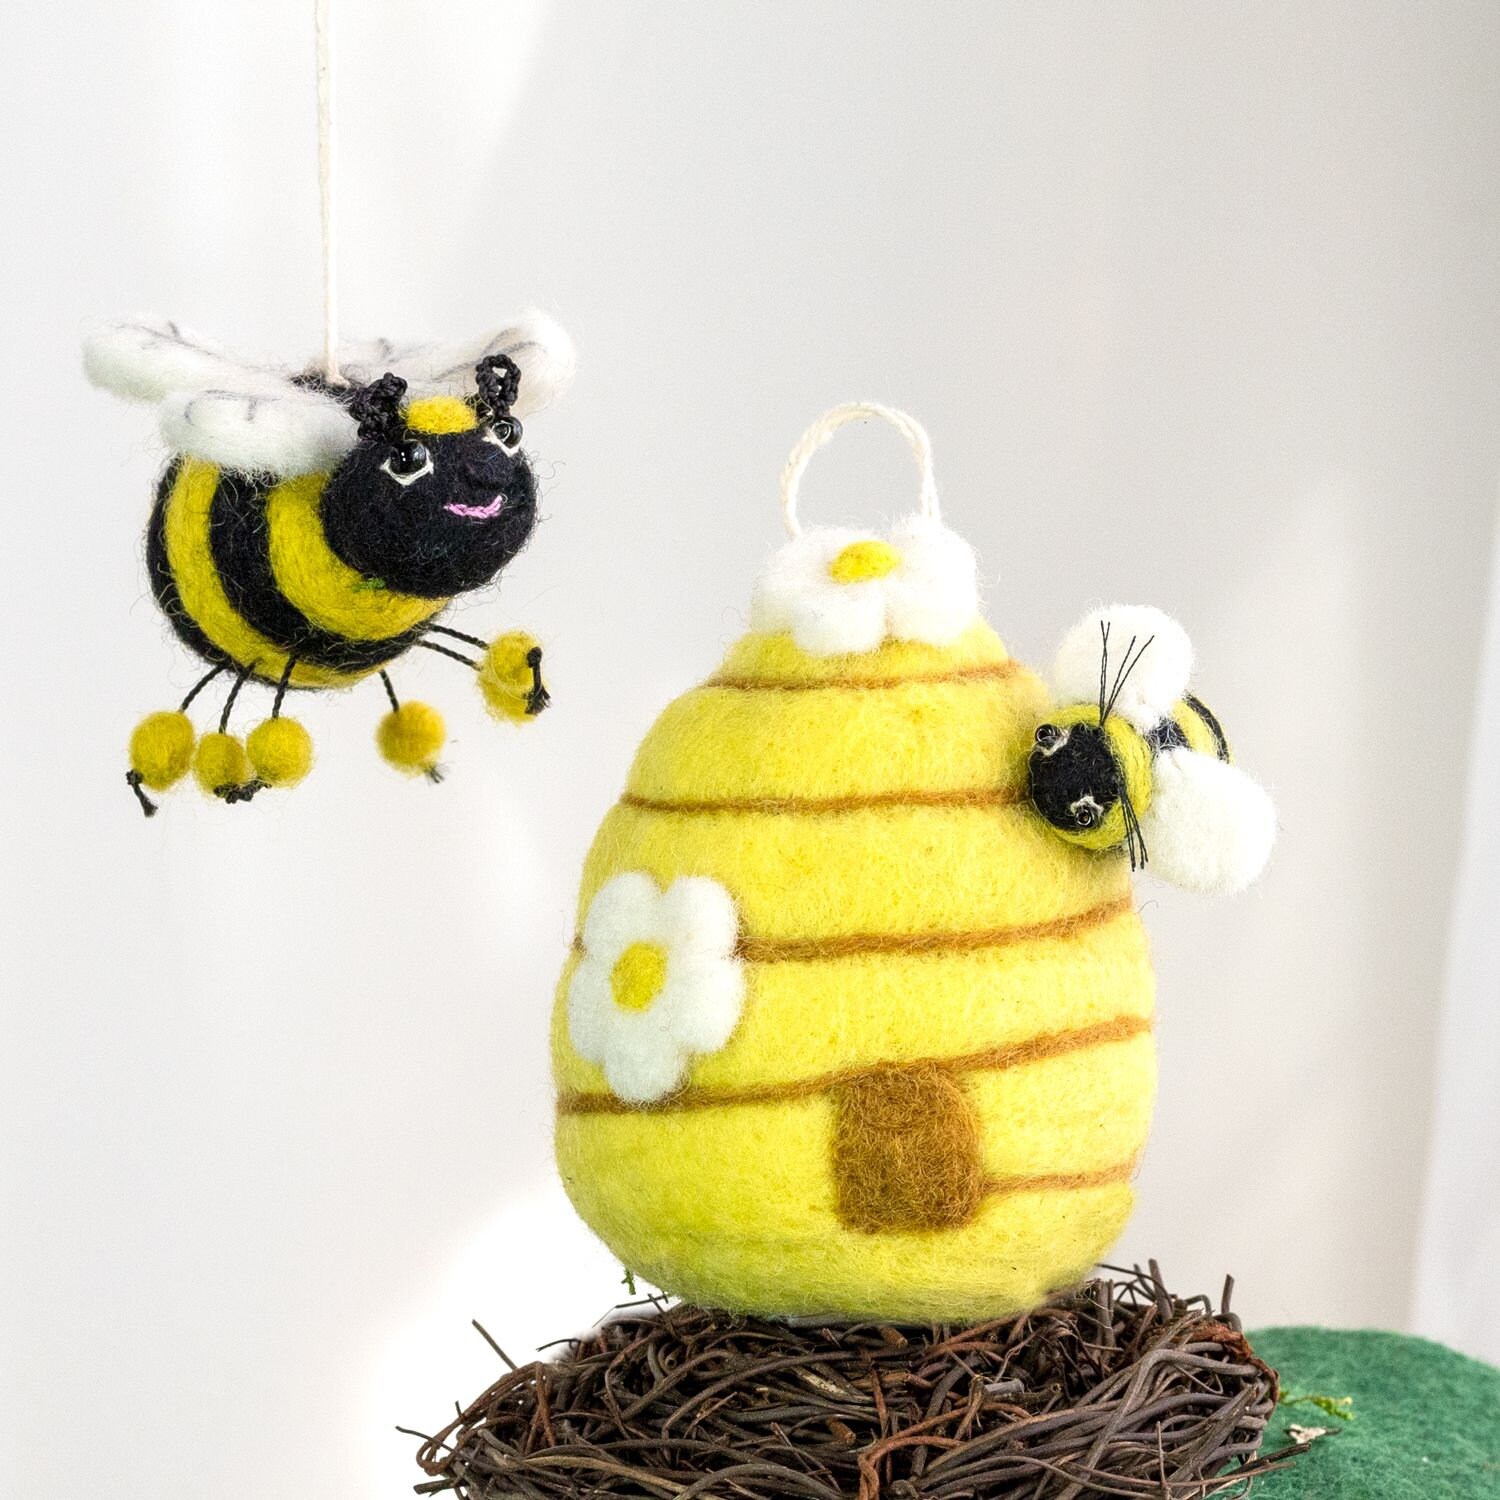 BEE HIVE and BEES for Home Decor, Bee Themed Decor, and Girl Room